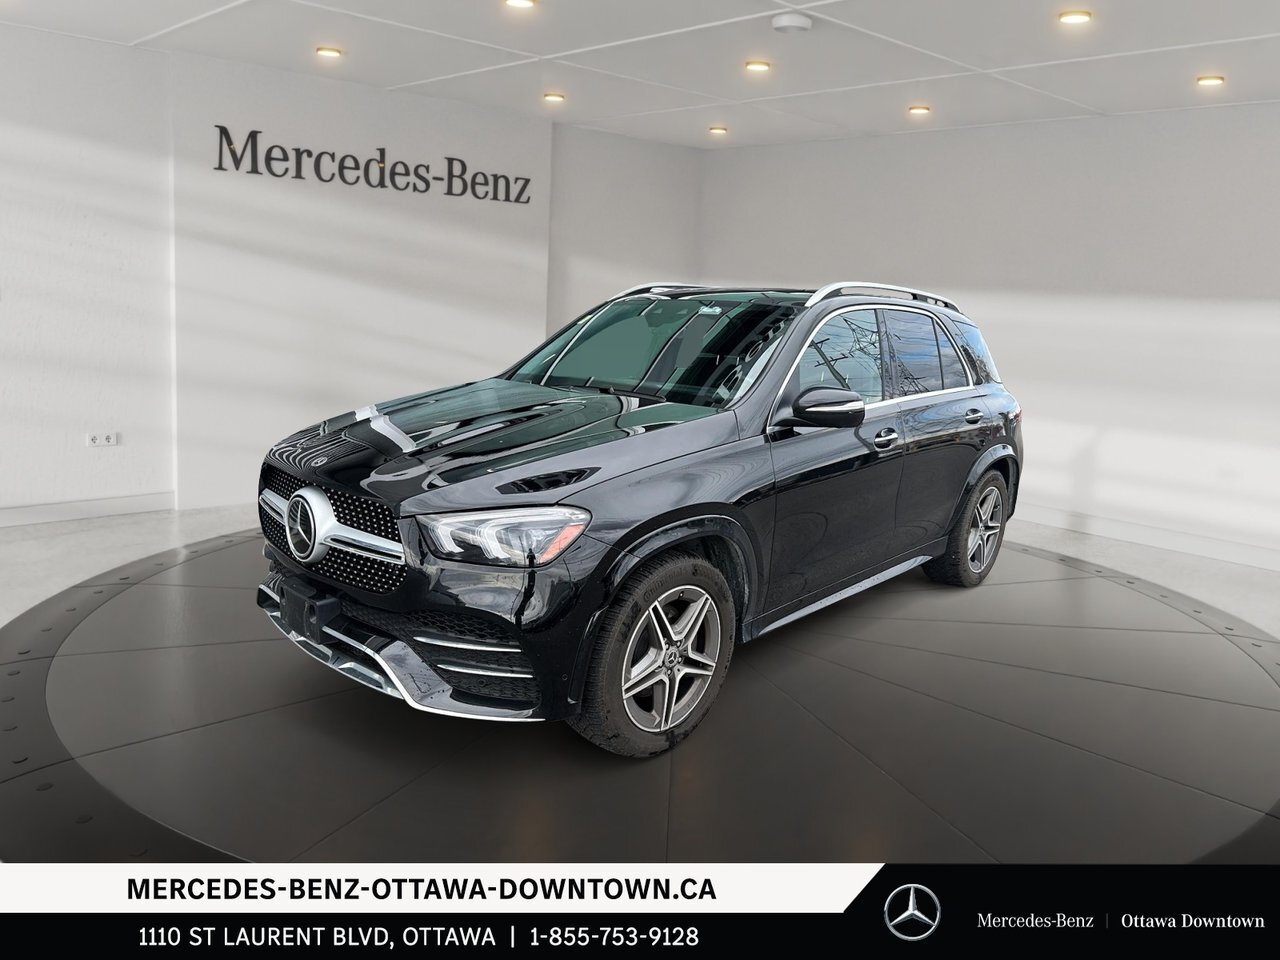 2021 Mercedes-Benz GLE350 4MATIC SUV-Every feature available Fully loaded 1 